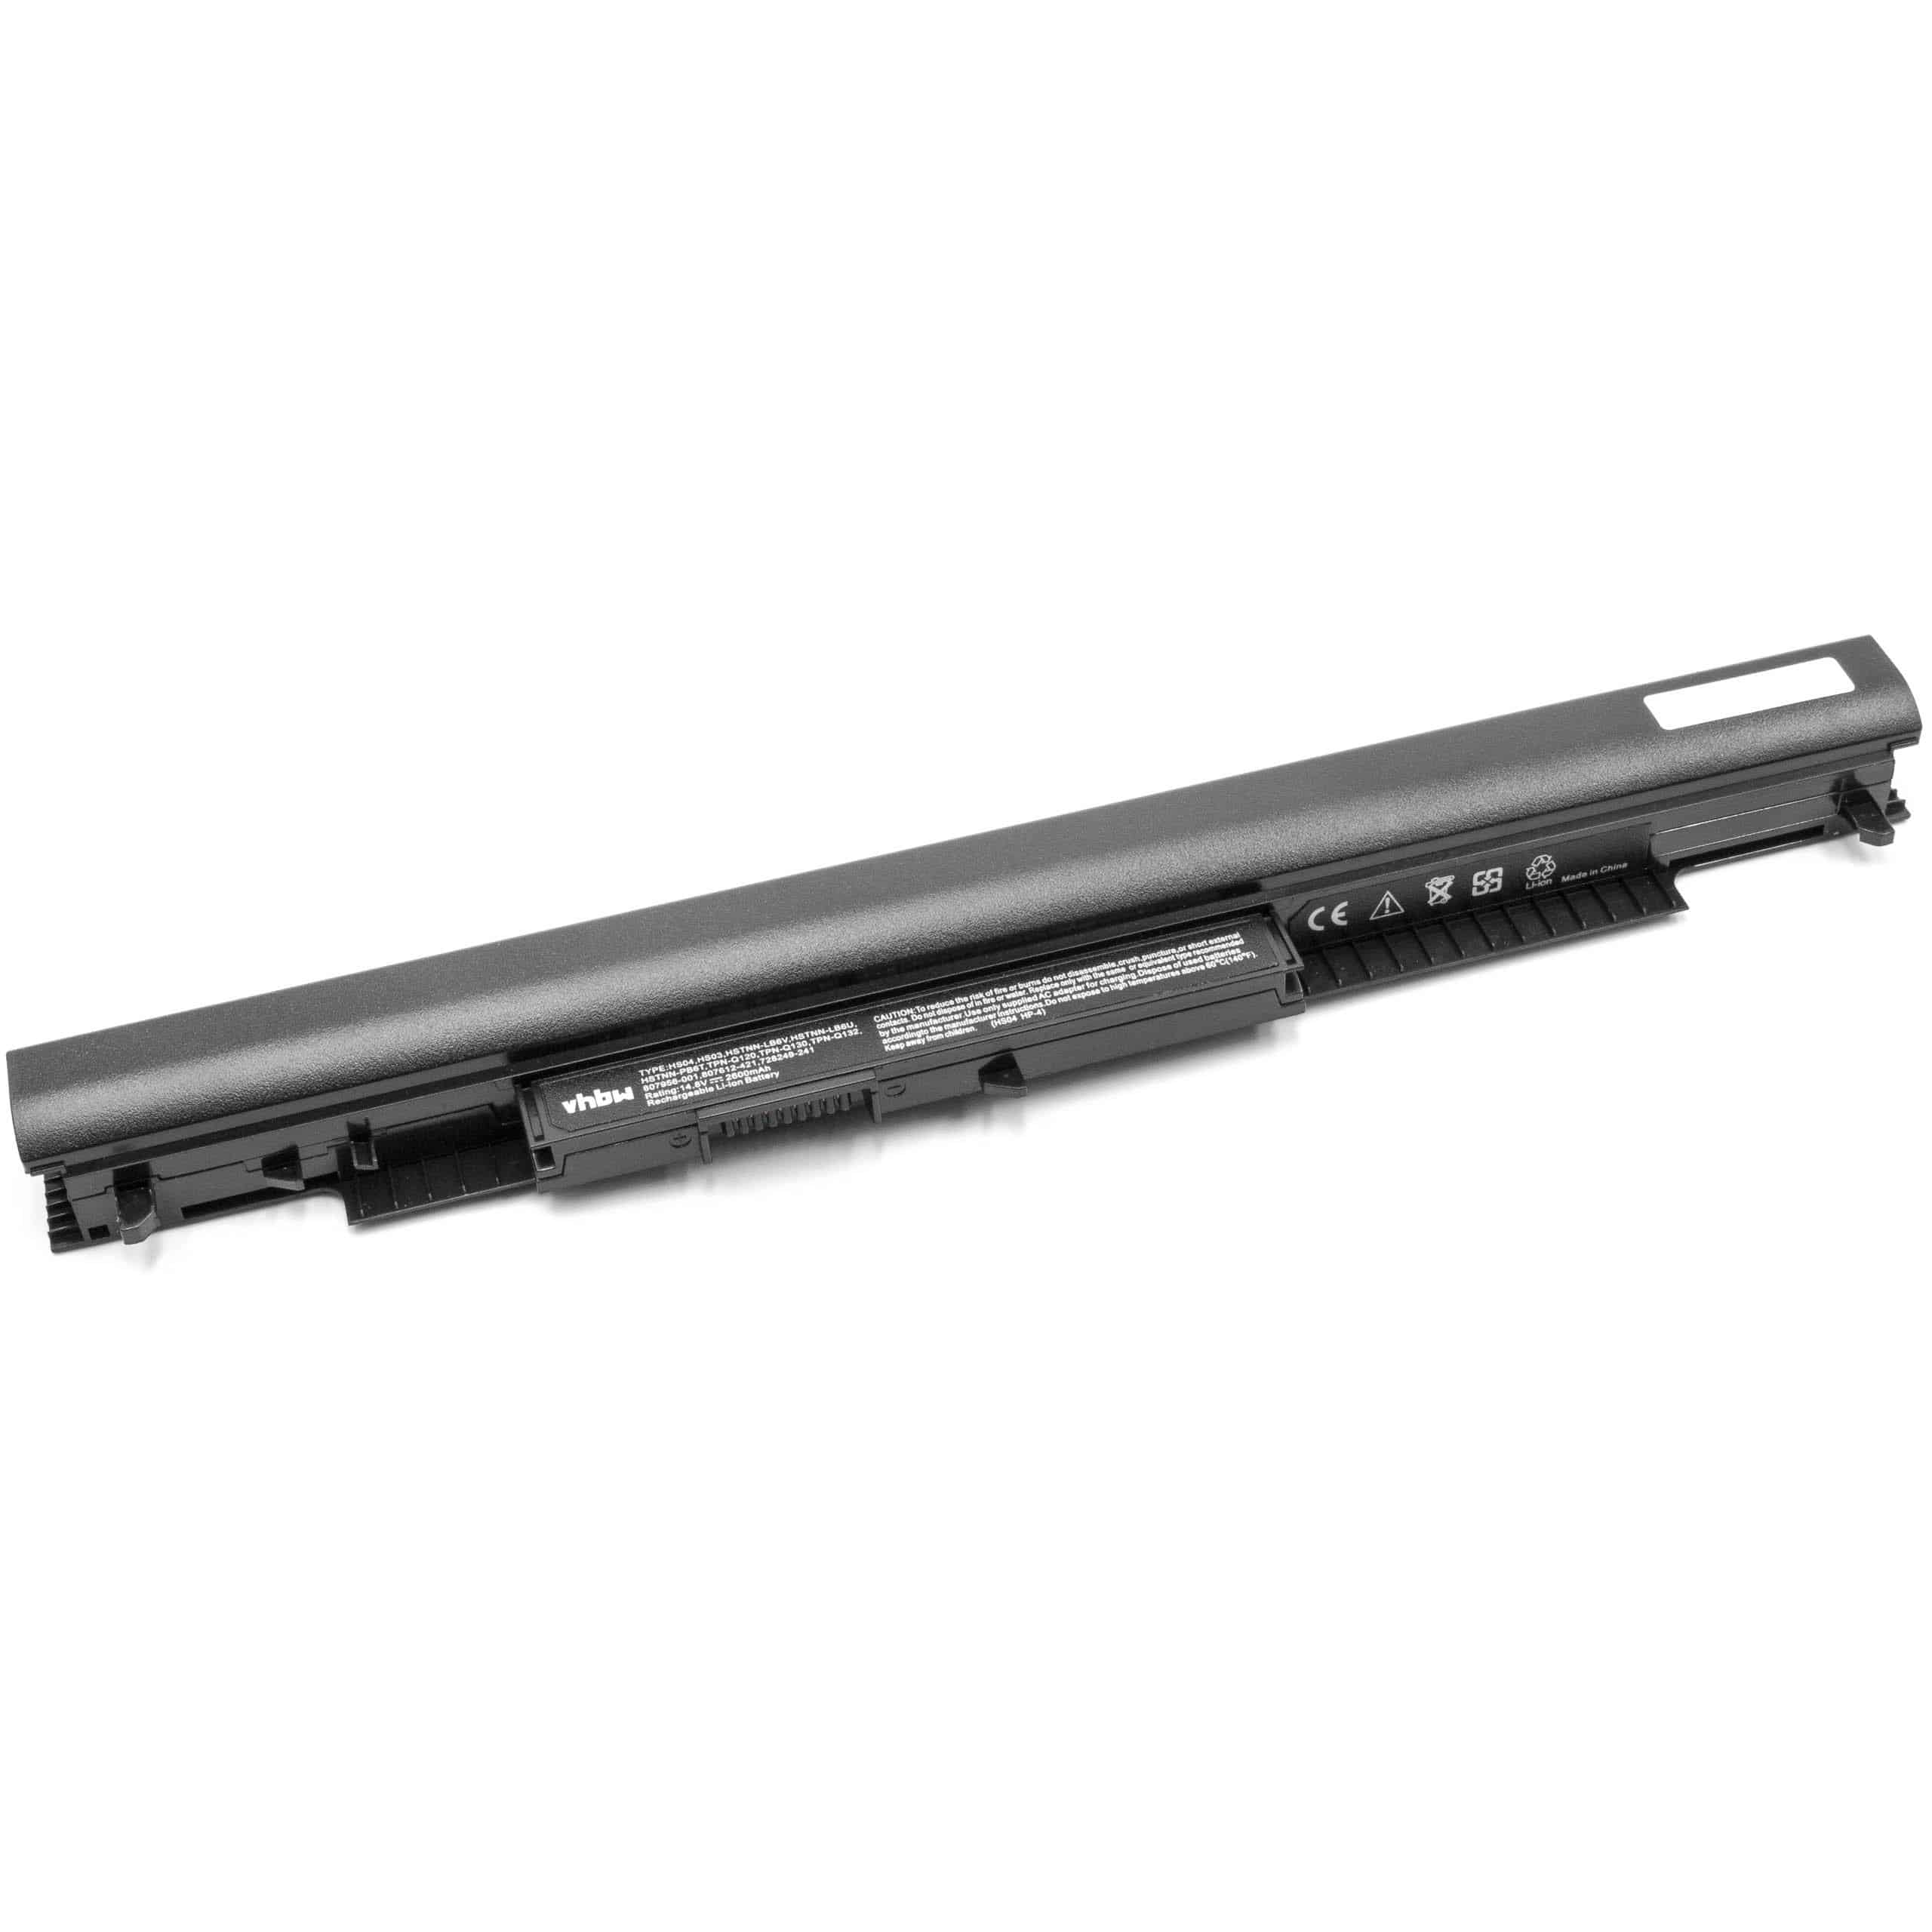 Notebook Battery Replacement for HP 807611-141, 807611-421, 807611-131 - 2600mAh 14.8V Li-Ion, black